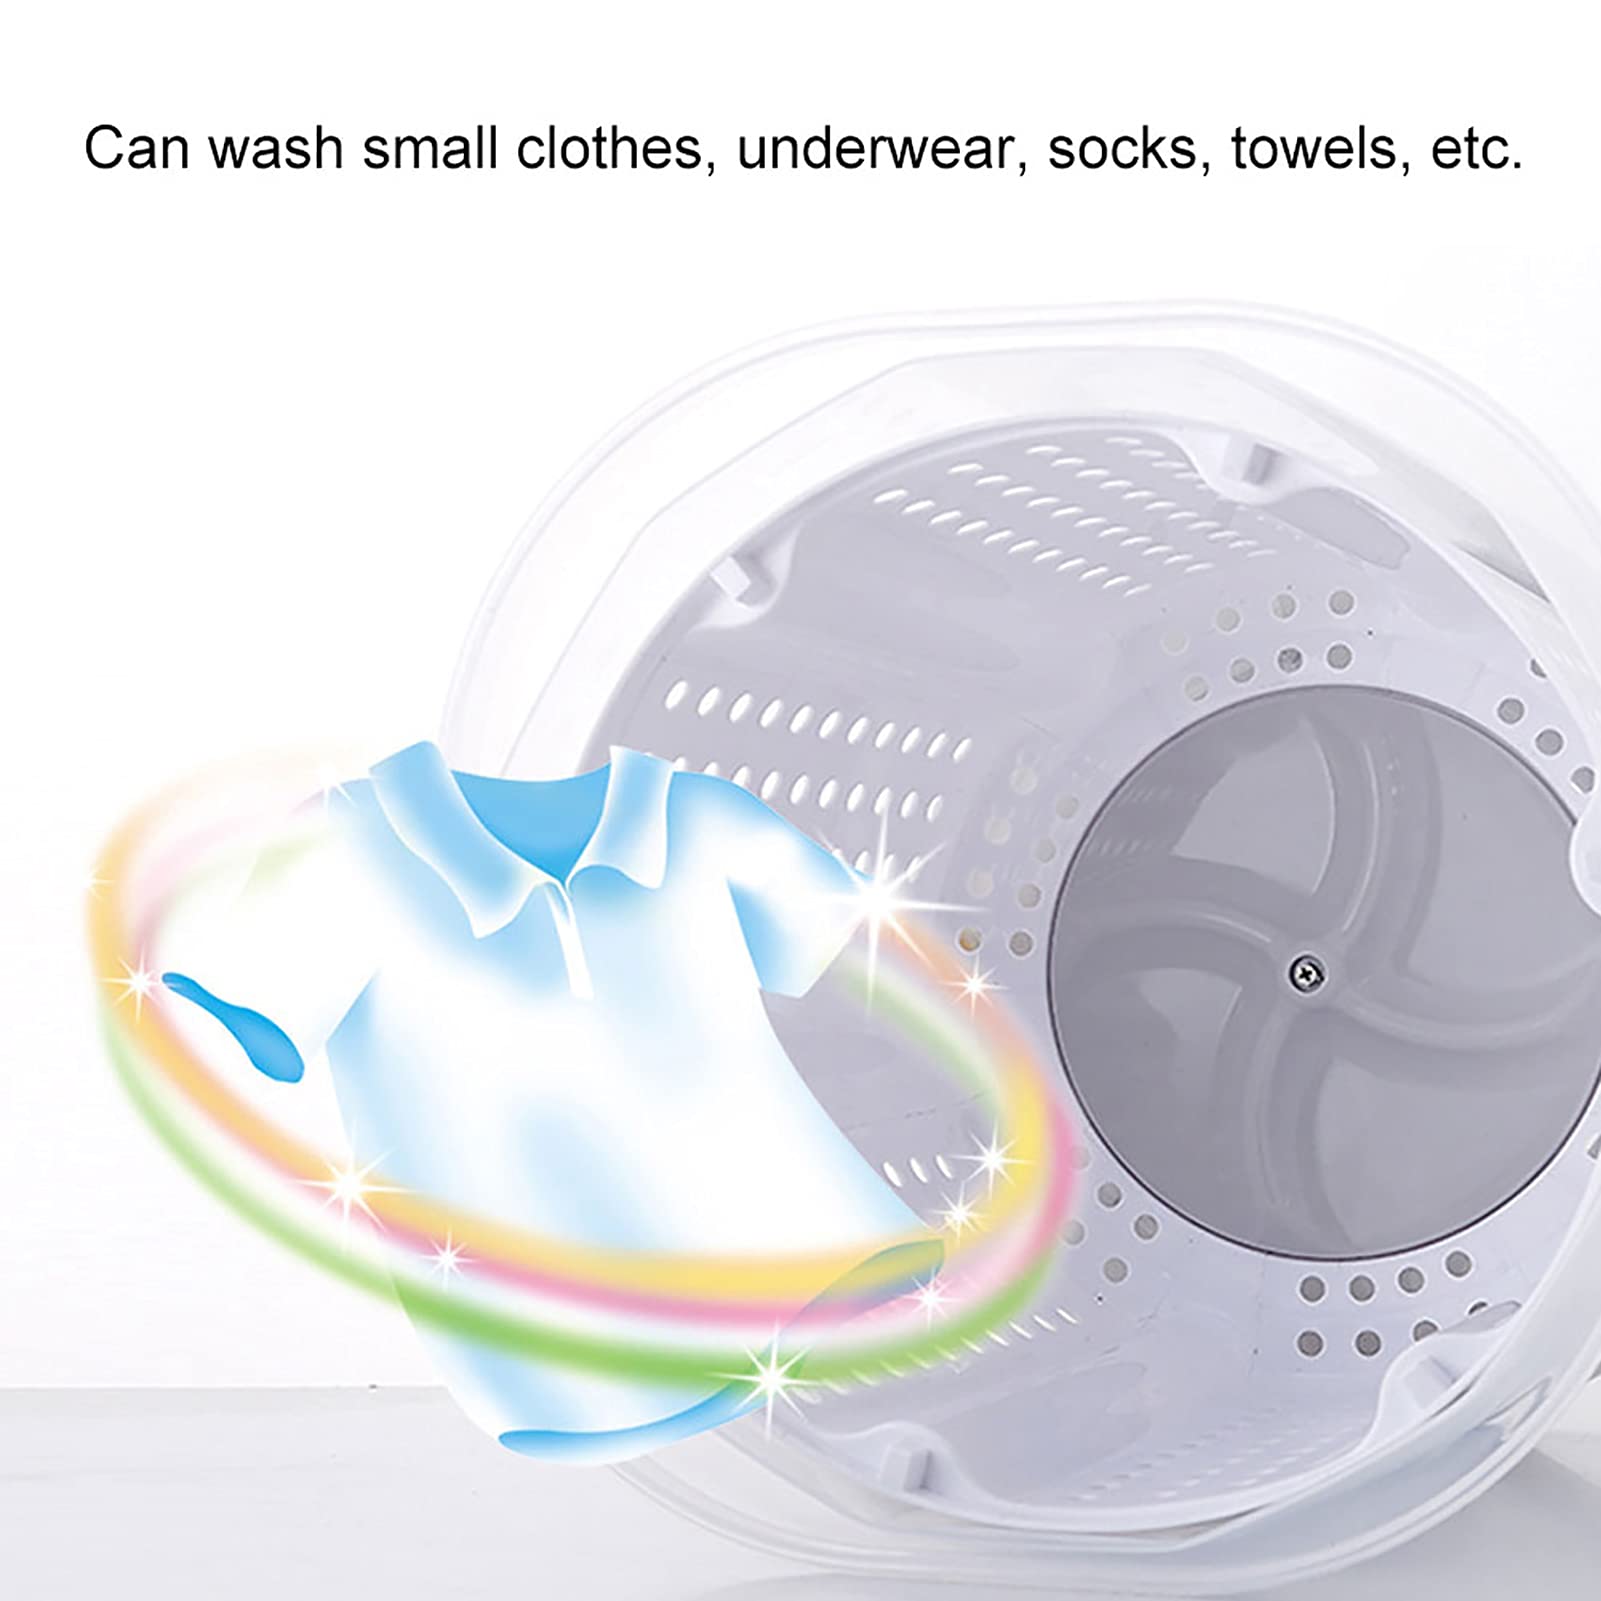 Mini Portable Manual Washer Home Dorm Gray Lingerie Washer Underwear Washing Machine Compact Size for Small Apartment Owners College Students Travelers